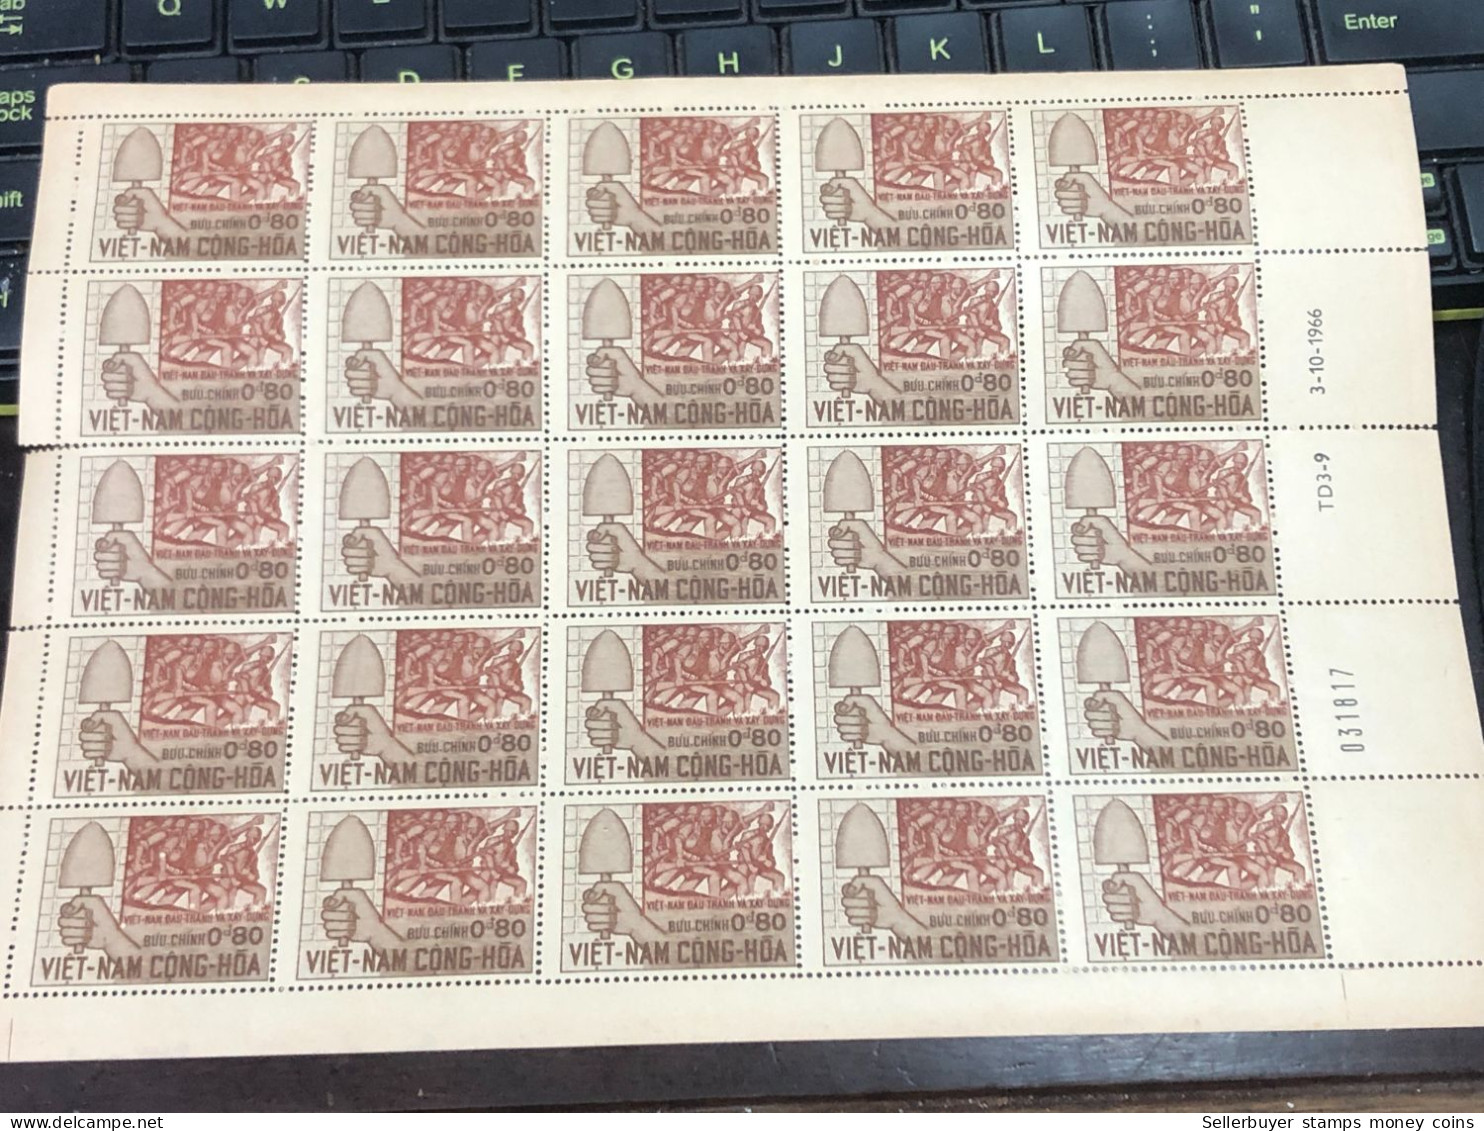 Sheet Vietnam South Stamps Before 1975(0$ 50 Struggle And Construction1966) 1 Pcs25 Stamps Quality Good - Vietnam